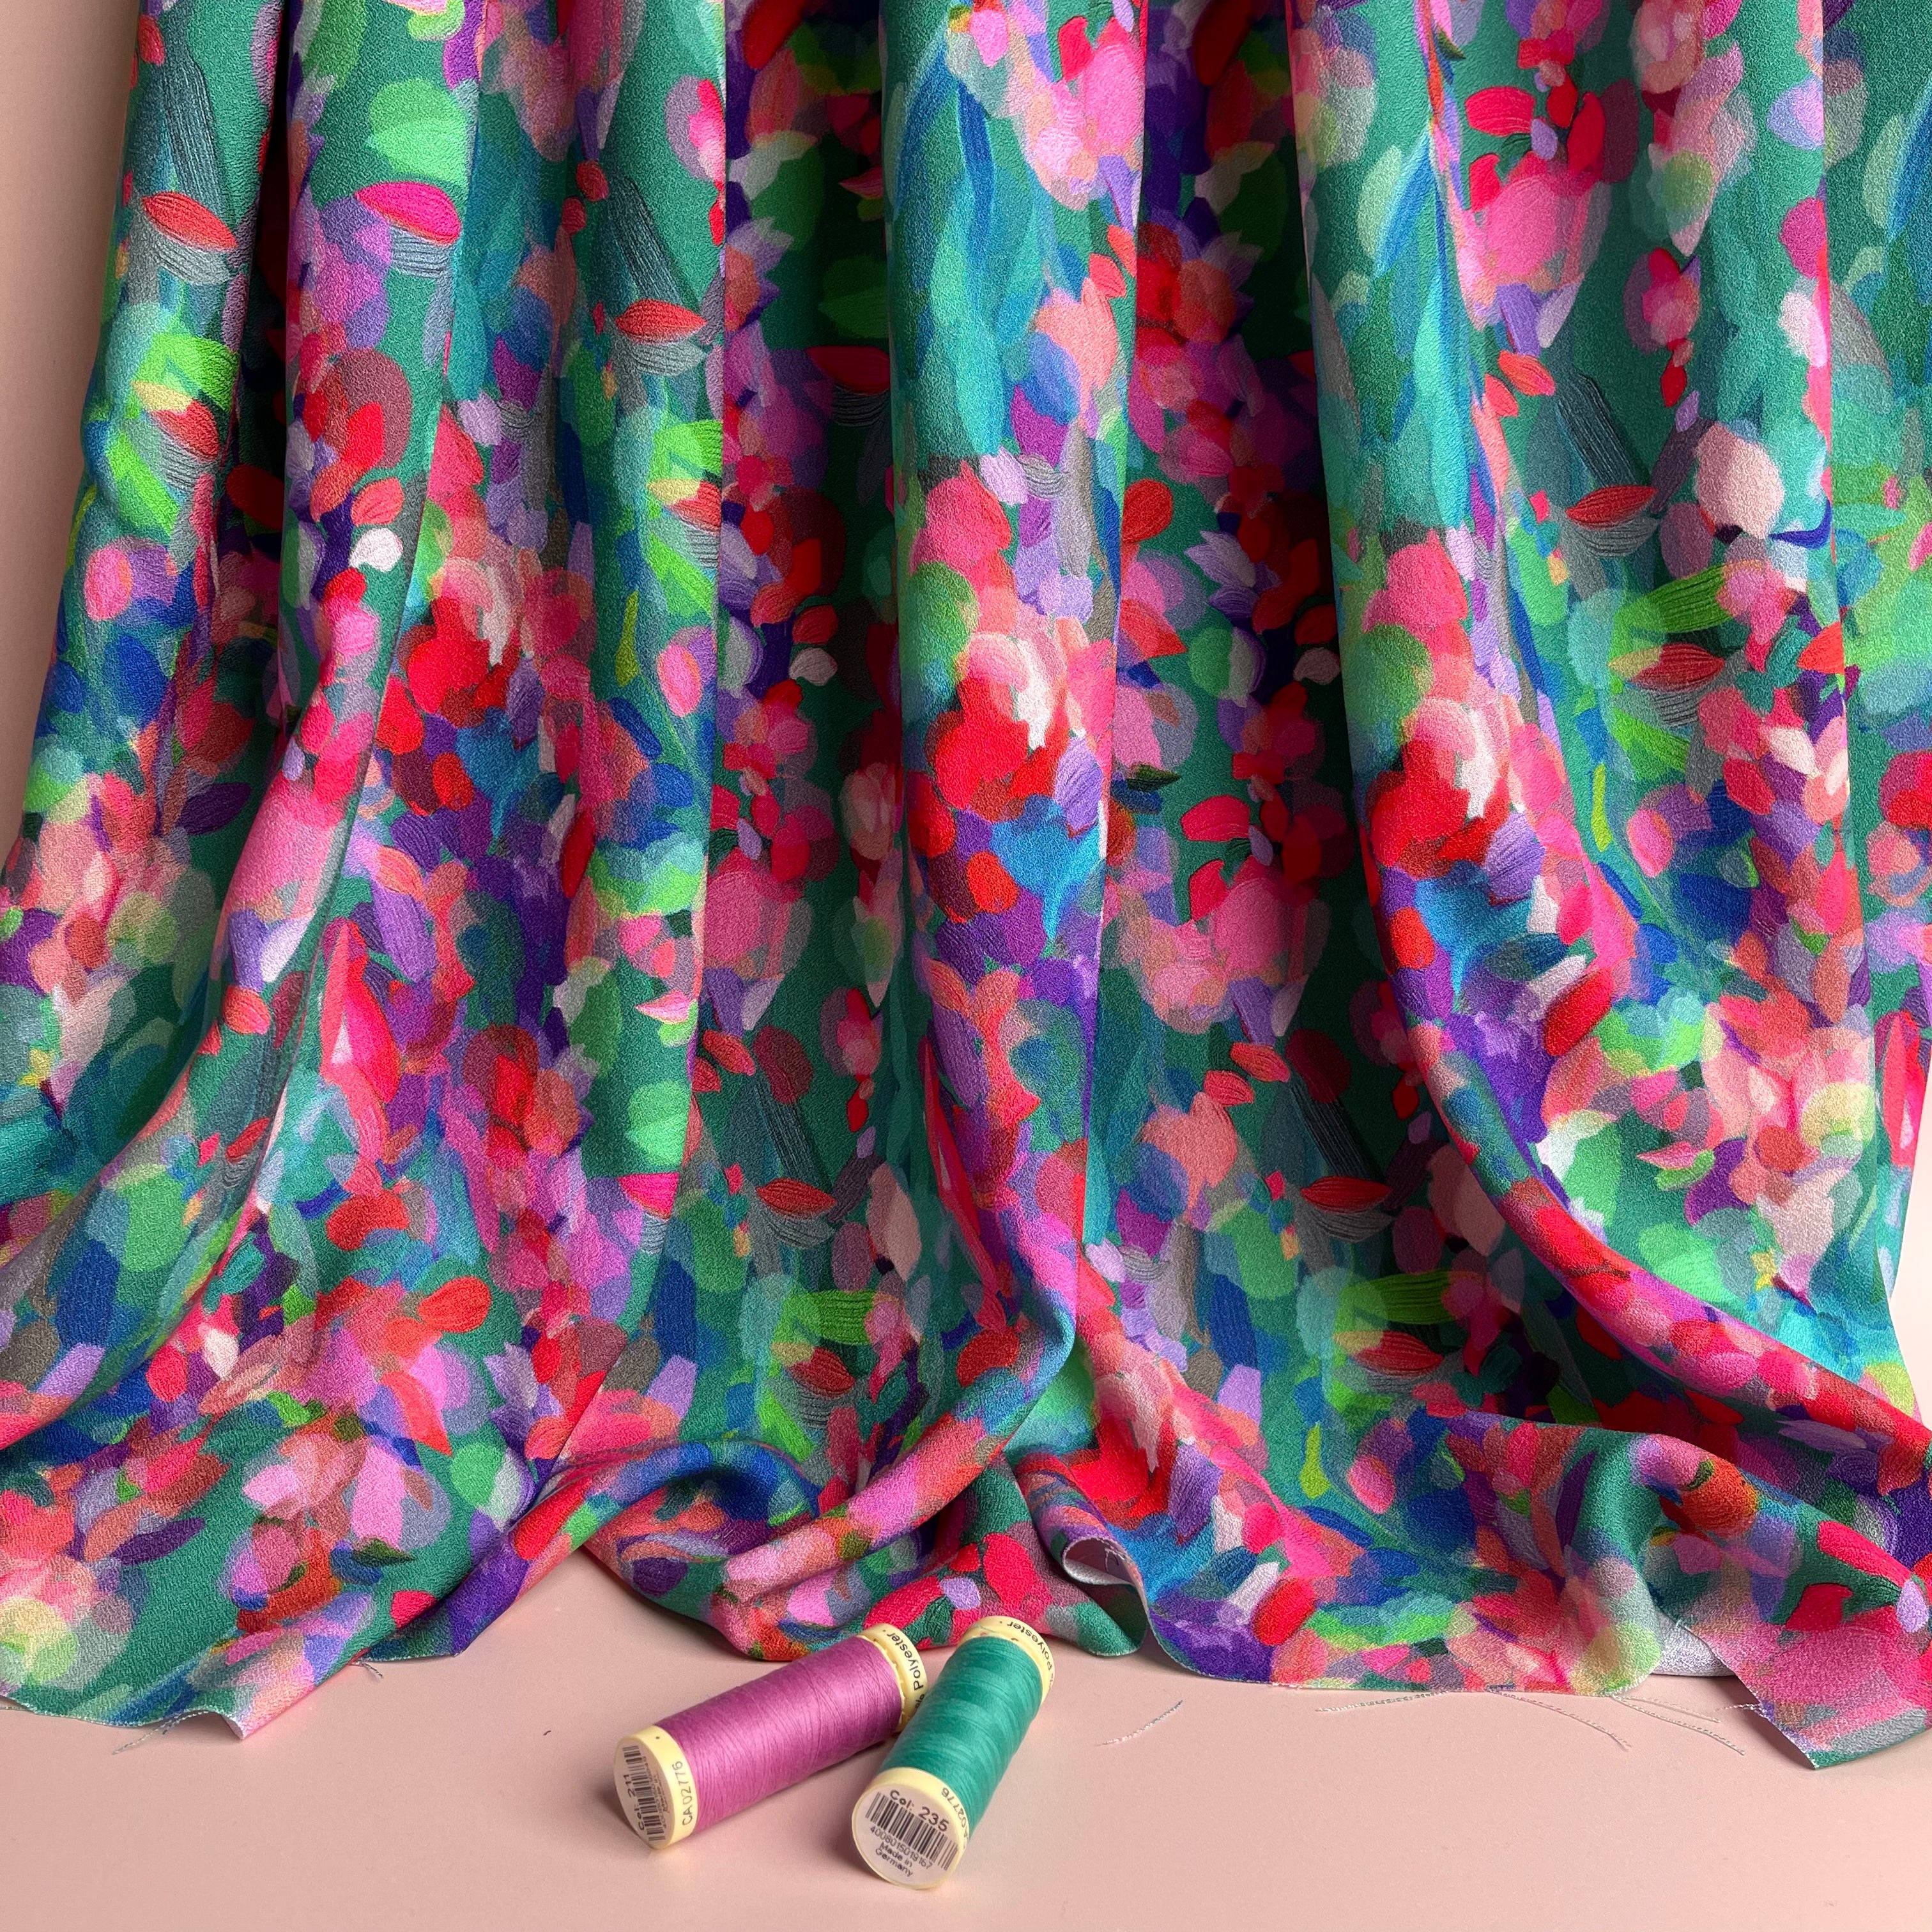 Summer Party - Lupine Petals Green Morracain Soft Viscose Crepe (more due soon)